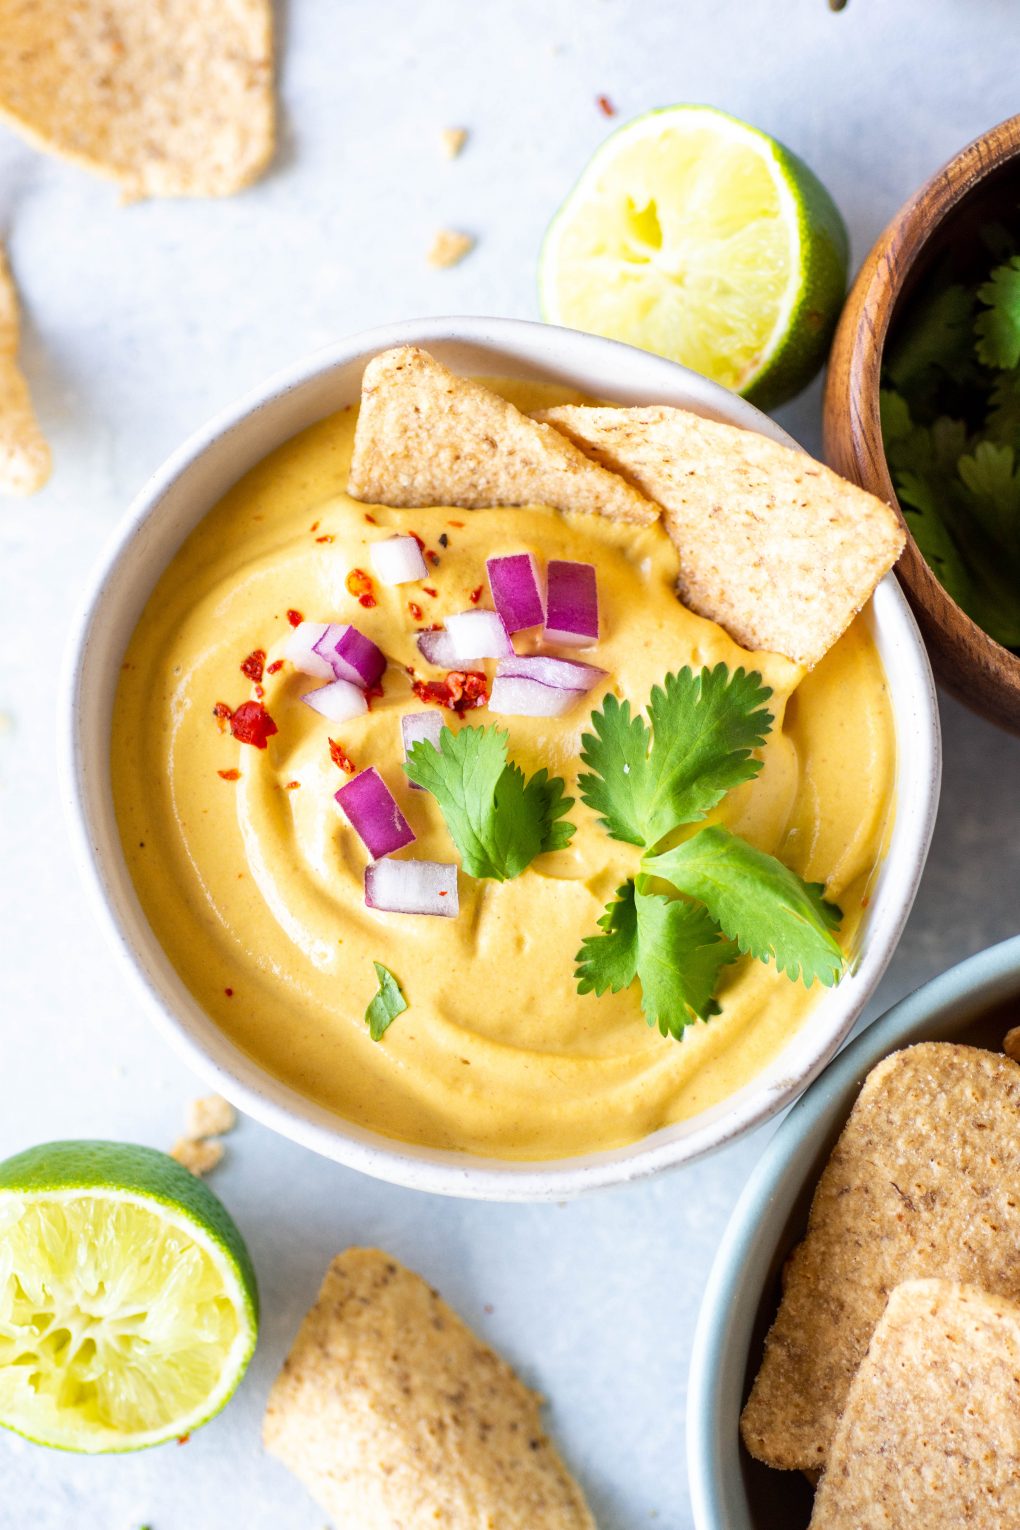 Small white bowl of pumpkin cashew queso on a light background. Garnished with chopped red onion, cilantro, and red chili flakes. Two chips are half dipped into the queso and it's surrounded by lime wedges and scattered chips.